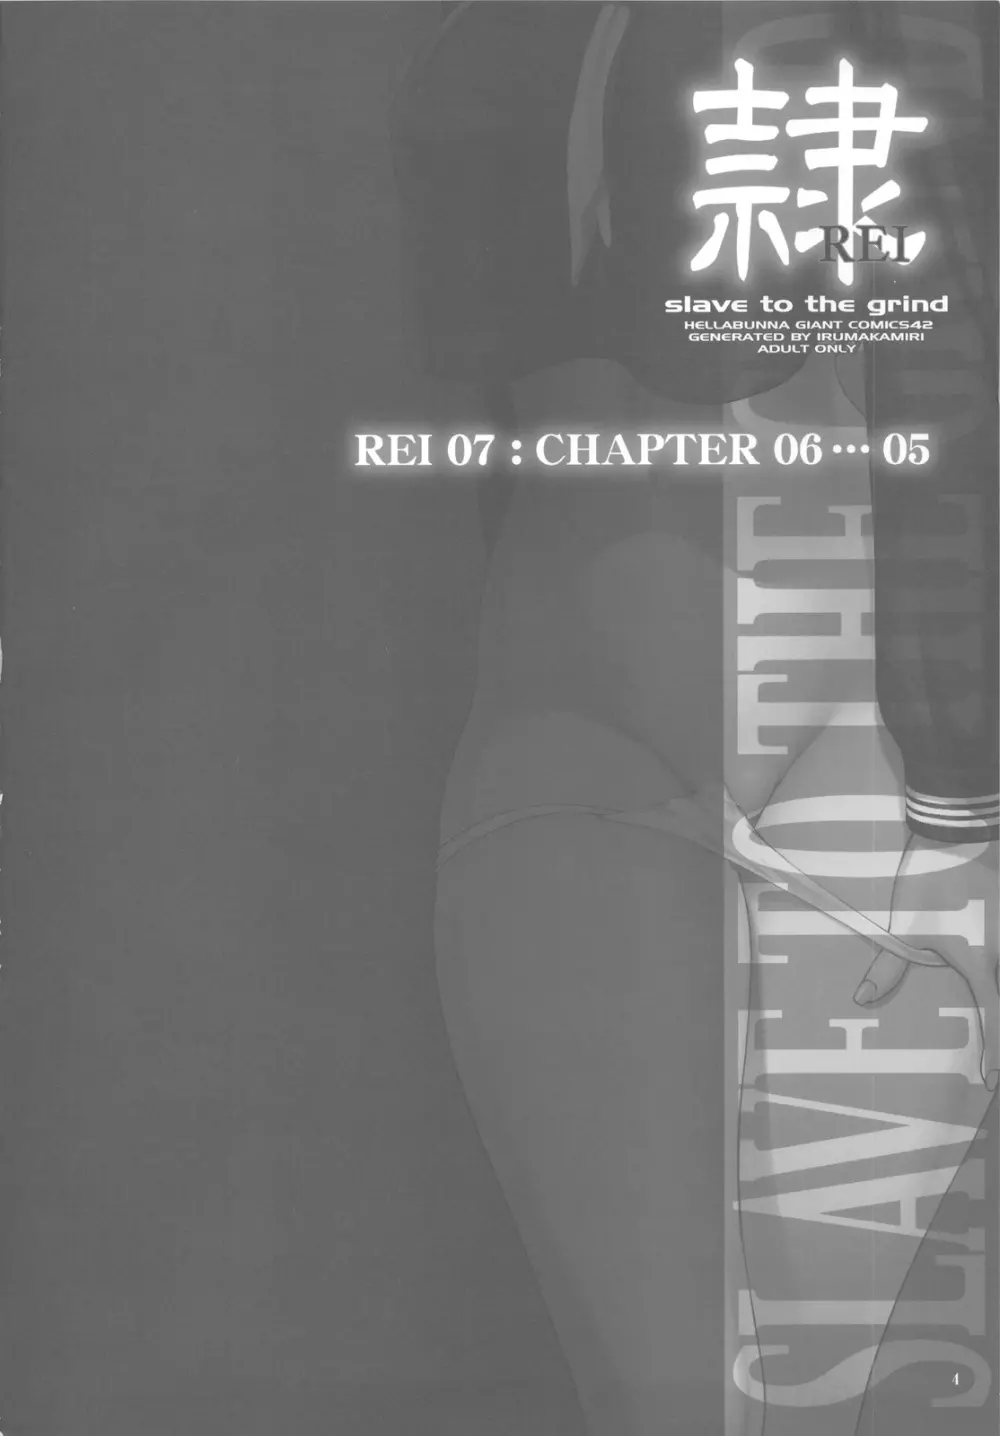 REI07: CHAPTER 06 – Slave to the Grind 4ページ